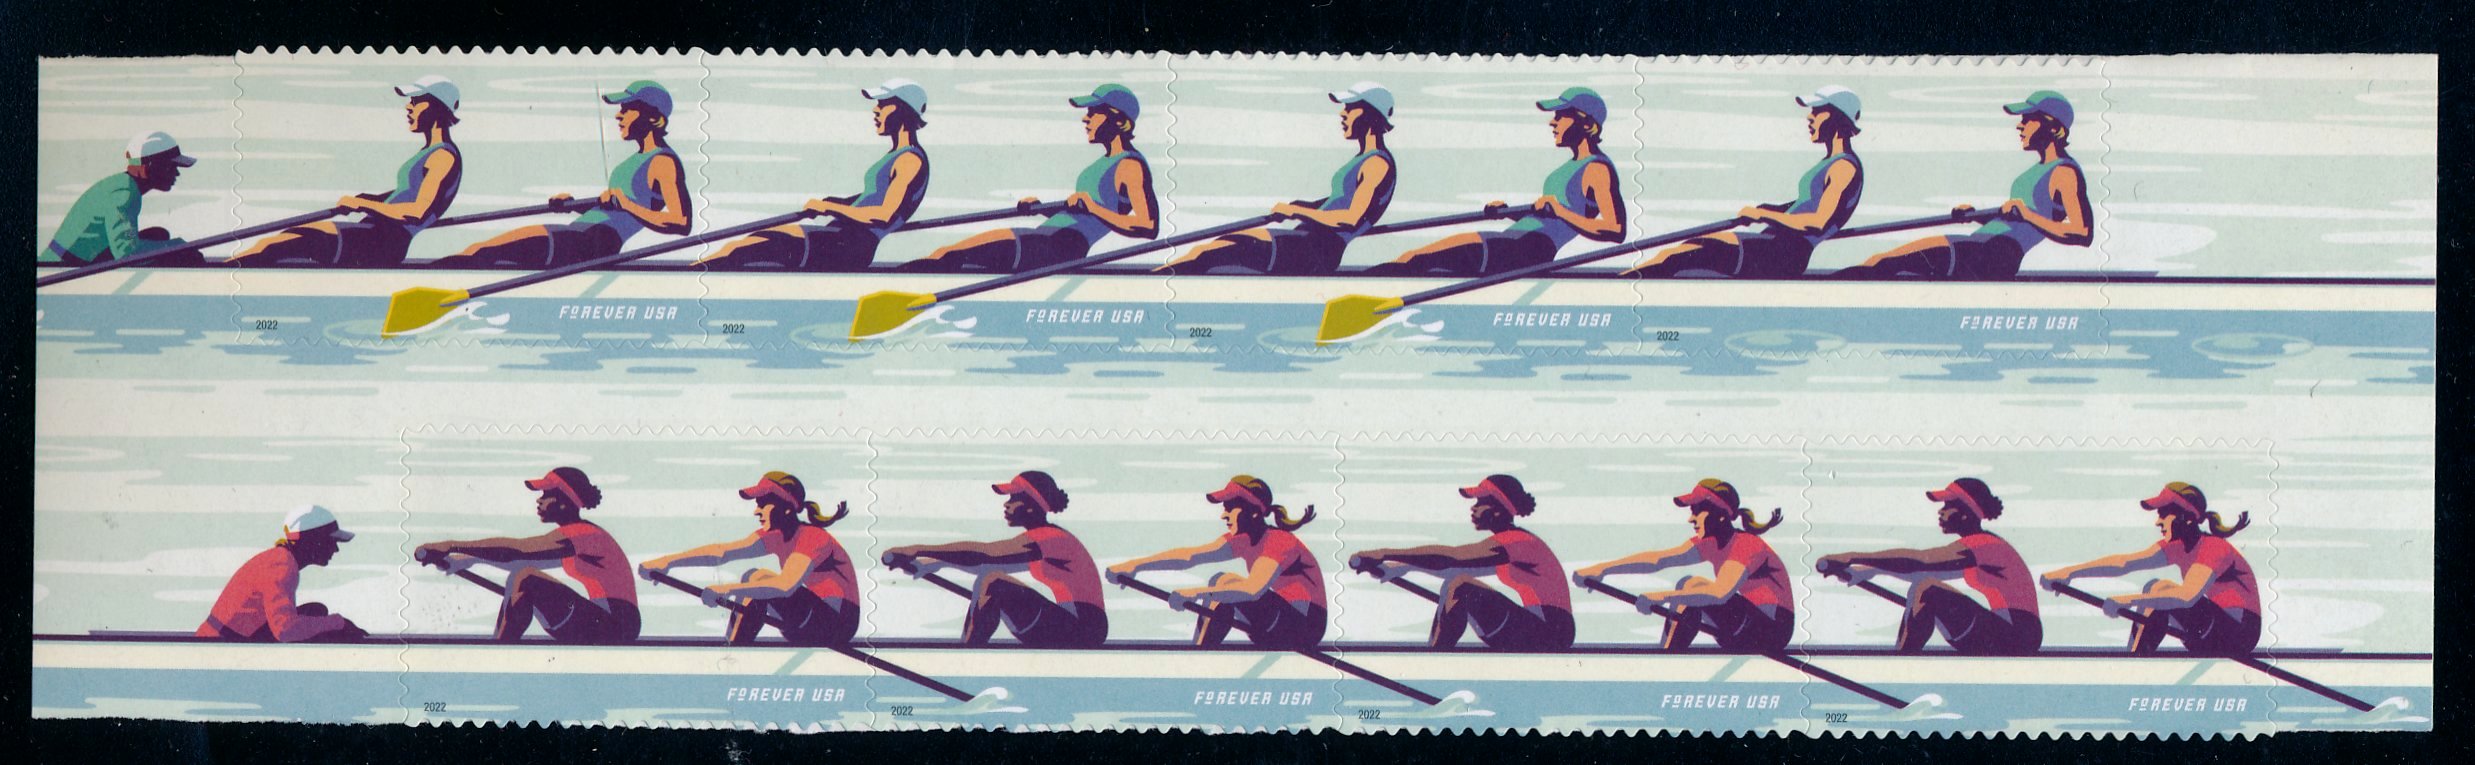 5694-5697blk Forever Woman Rowing Mint Block of 8 #5694-5697blk